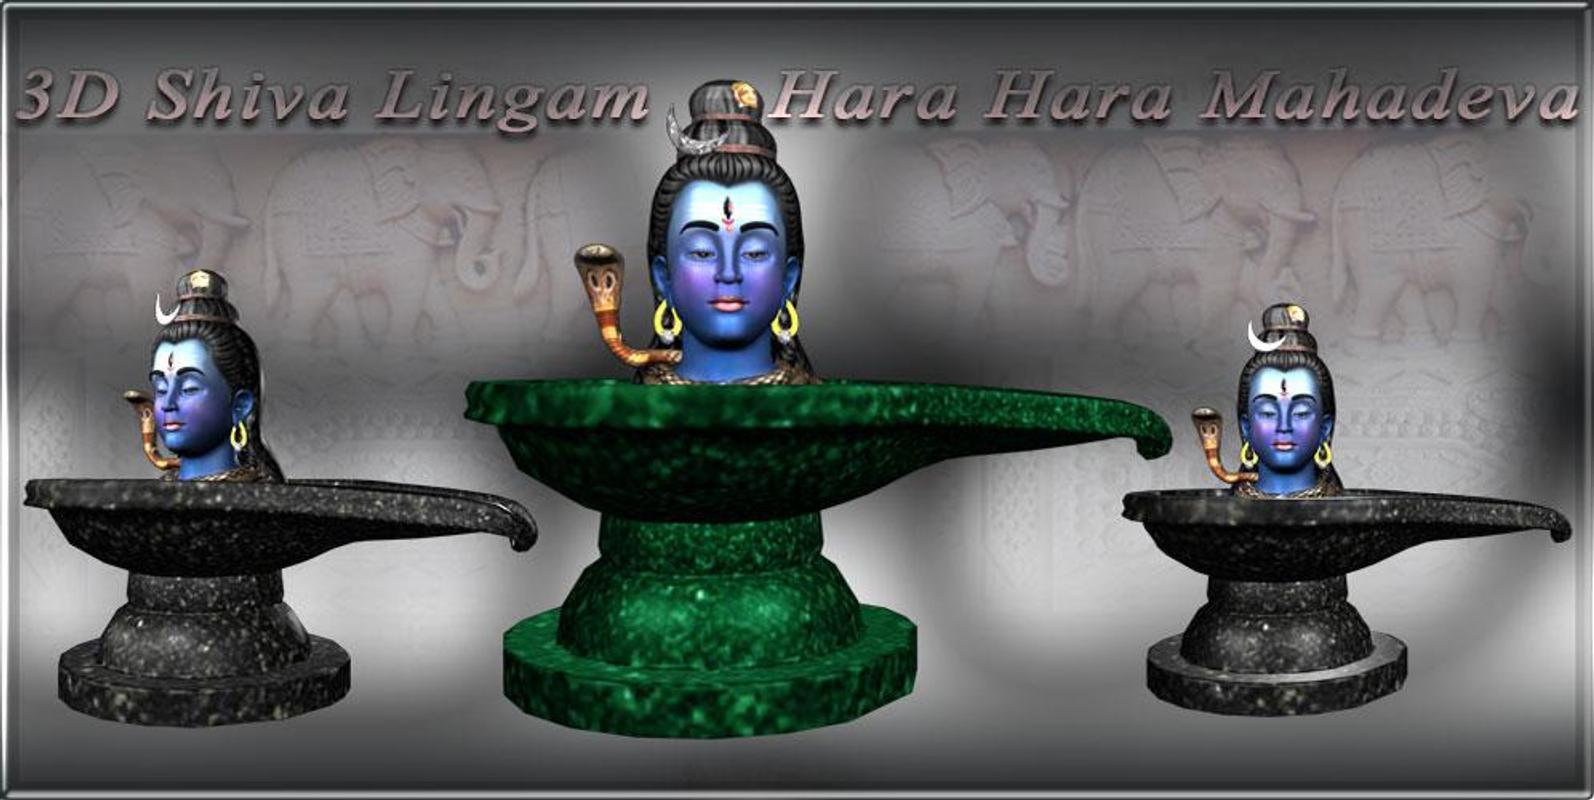 3D Shiva Lingam Live Wallpaper for Android